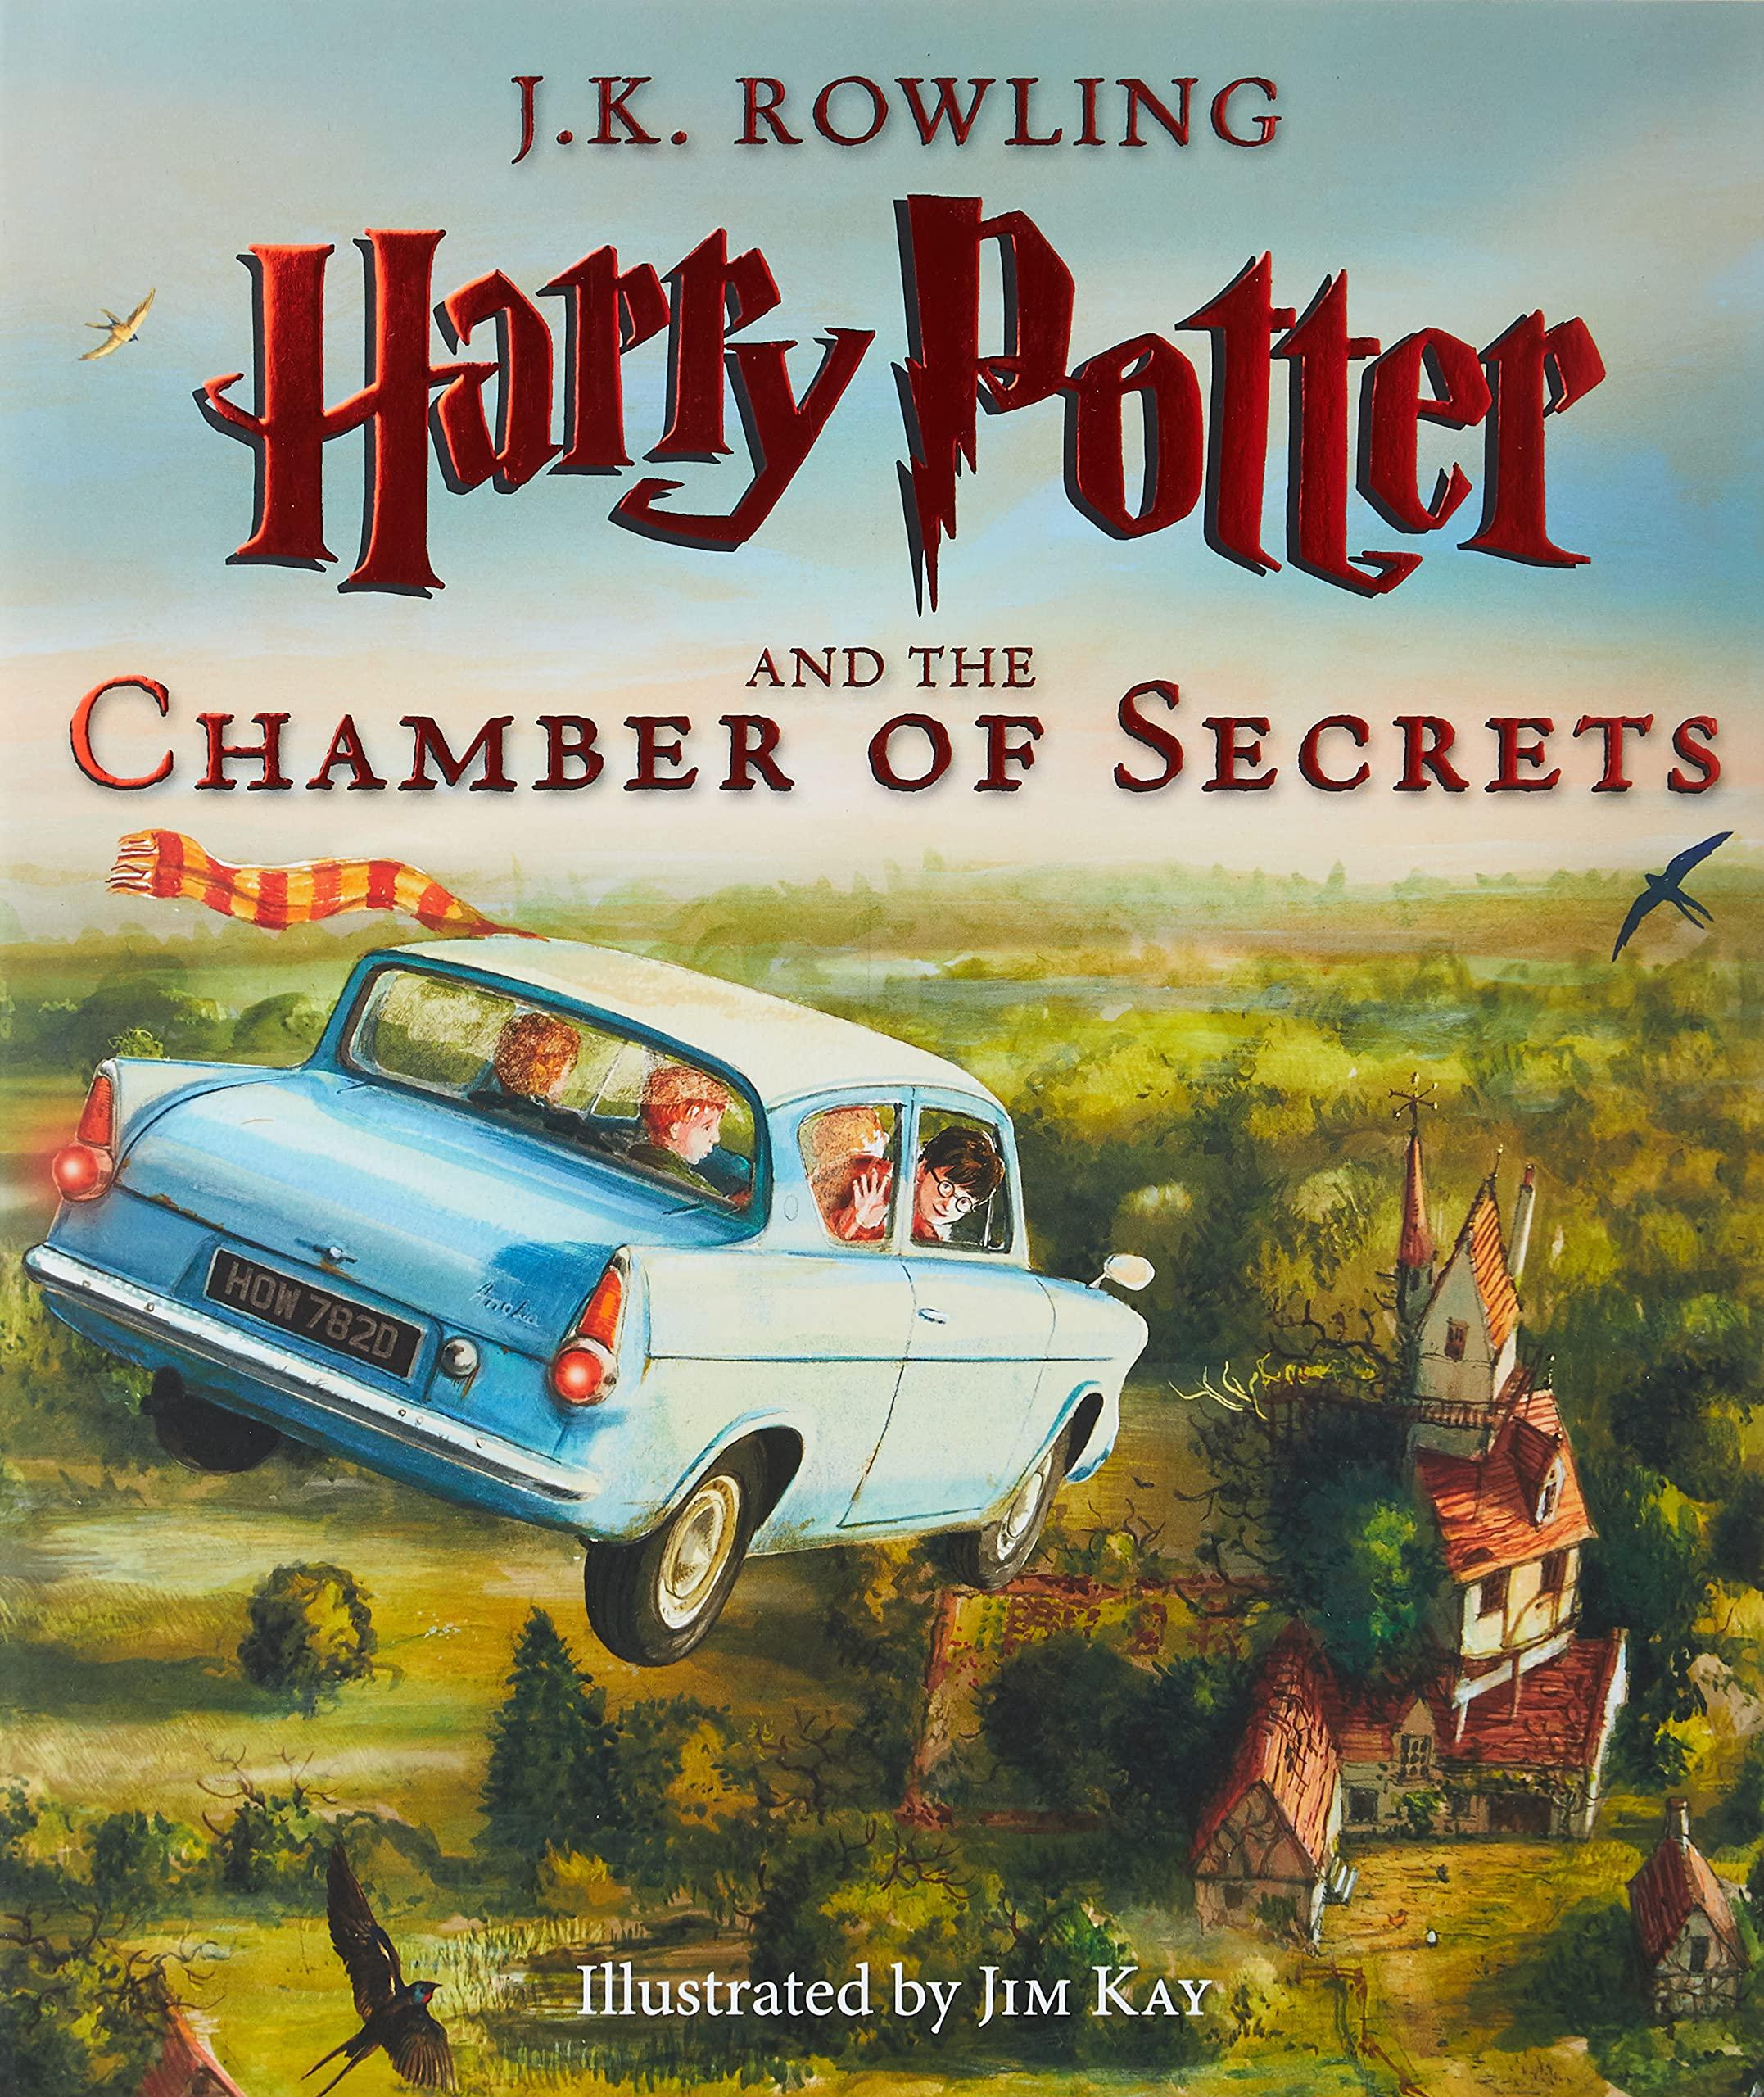 Harry Potter and the Chamber of Secrets Summary under 3 min (SPOILERS)